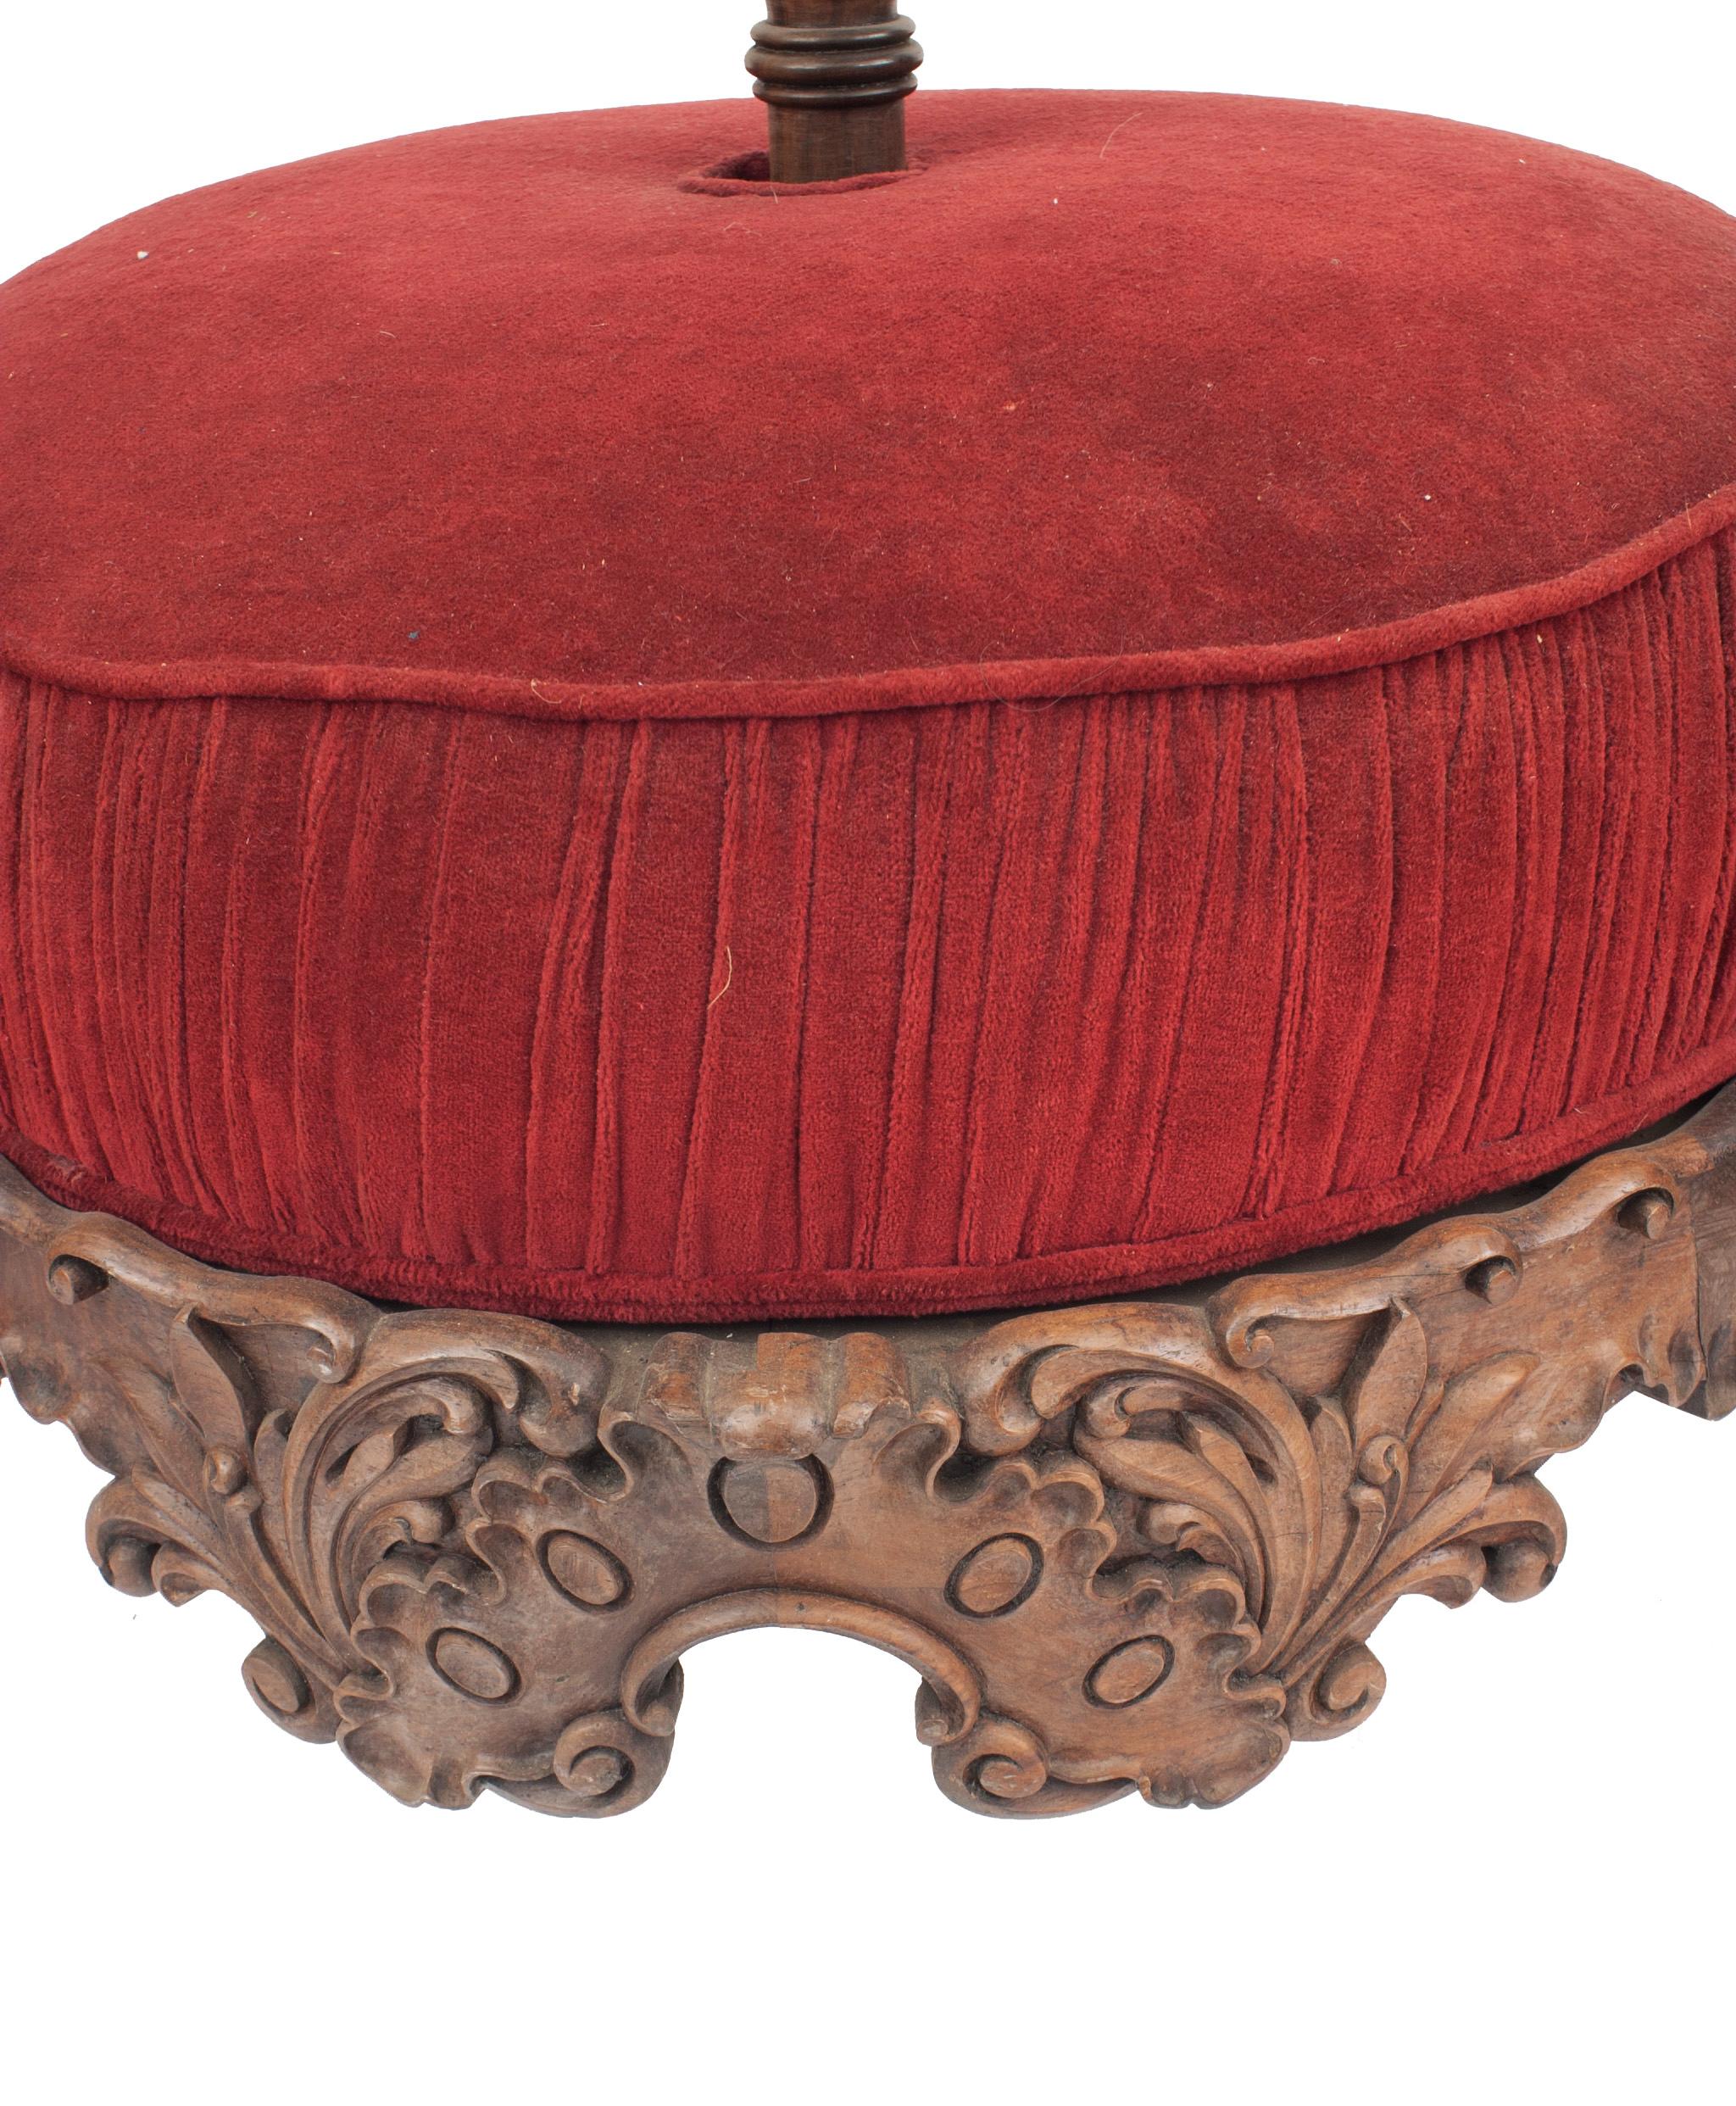 19th Century American Victorian Red Velvet Tete-a-tete For Sale